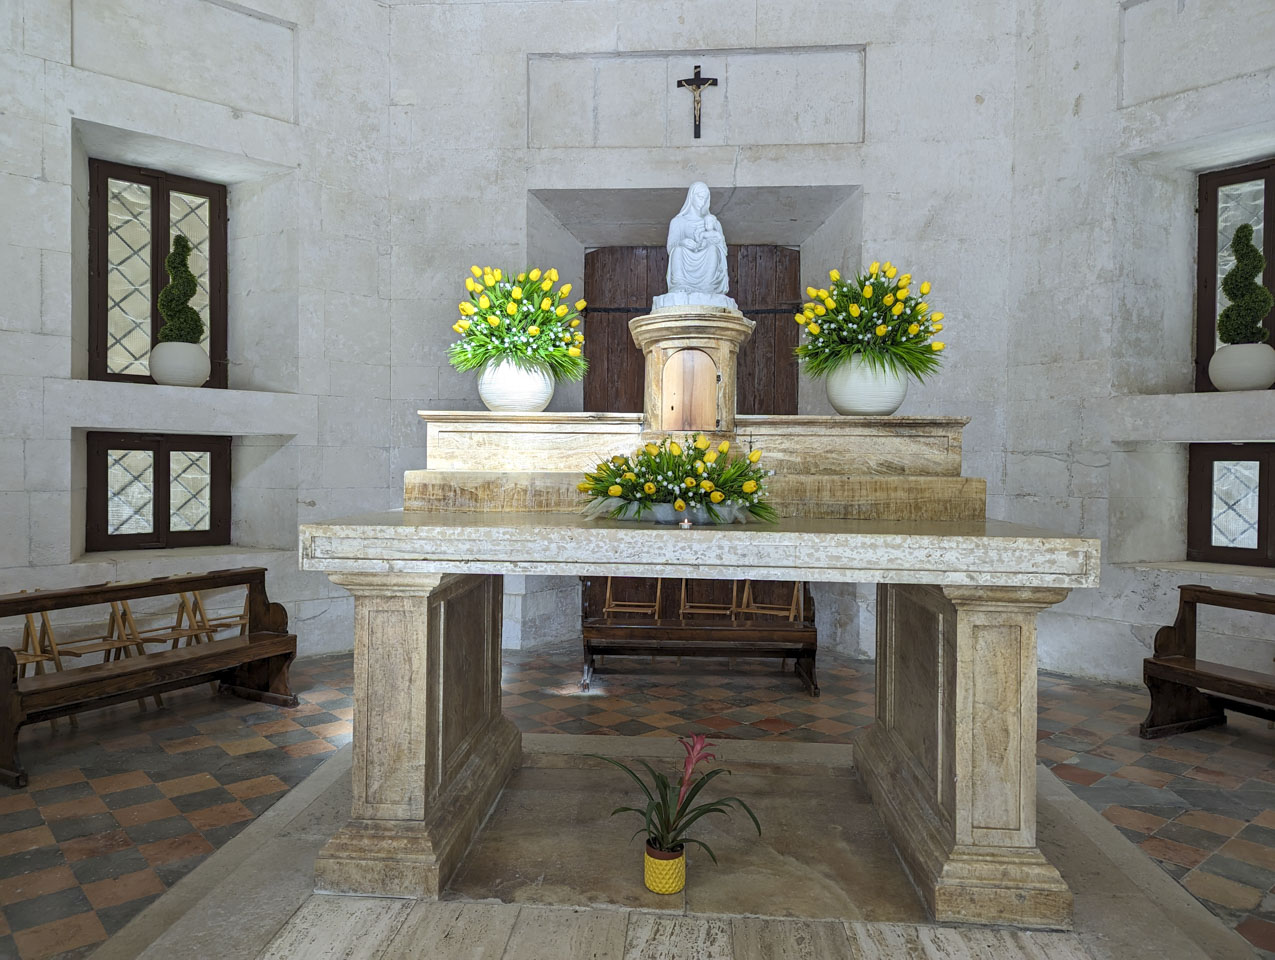 Interior of the chapel with the statue